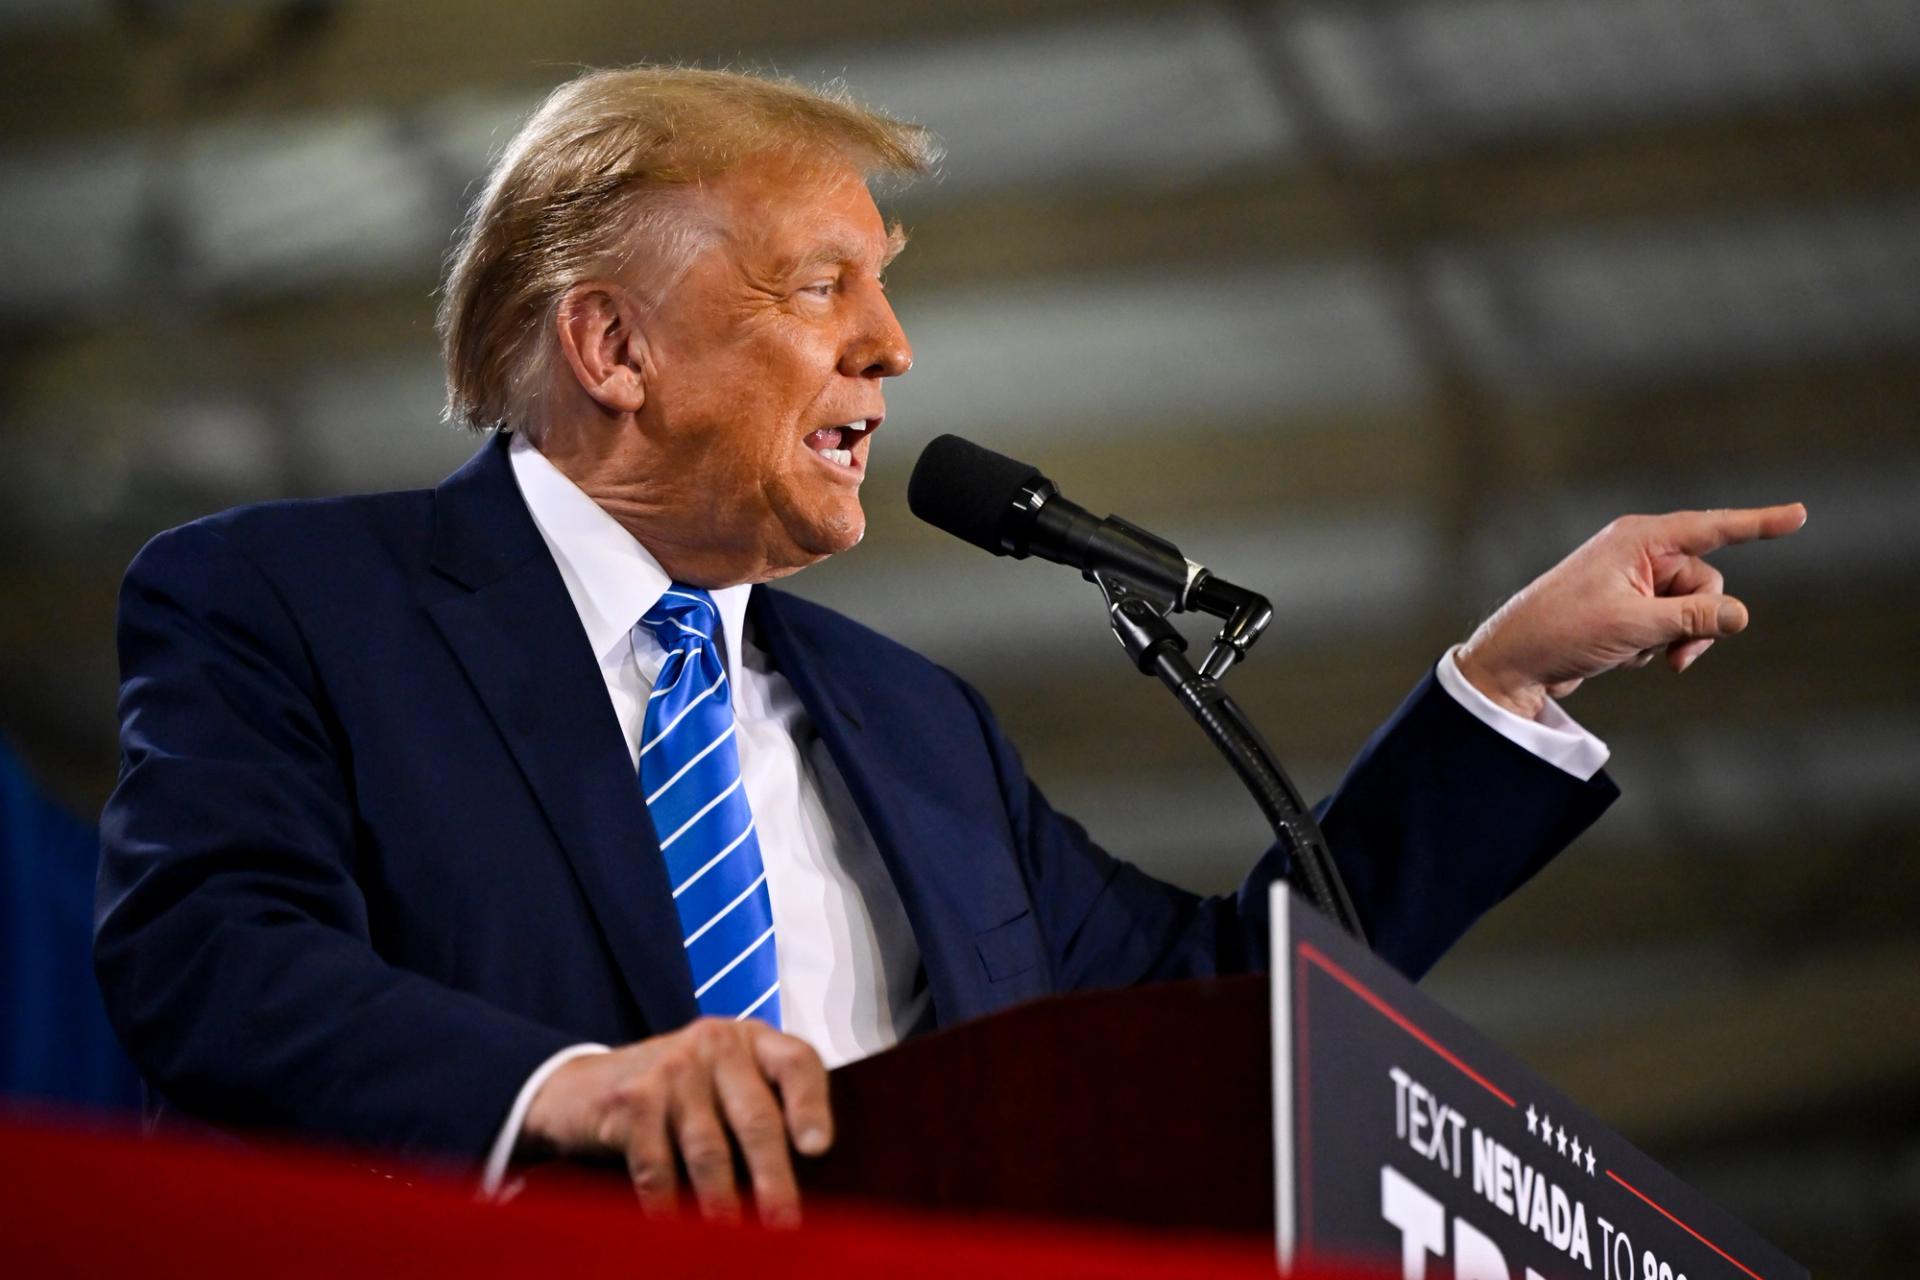 Republican presidential candidate and former U.S. President Donald Trump speaks during a campaign event at Big League Dreams Las Vegas on Jan. 27, 2024, in Las Vegas, Nevada.